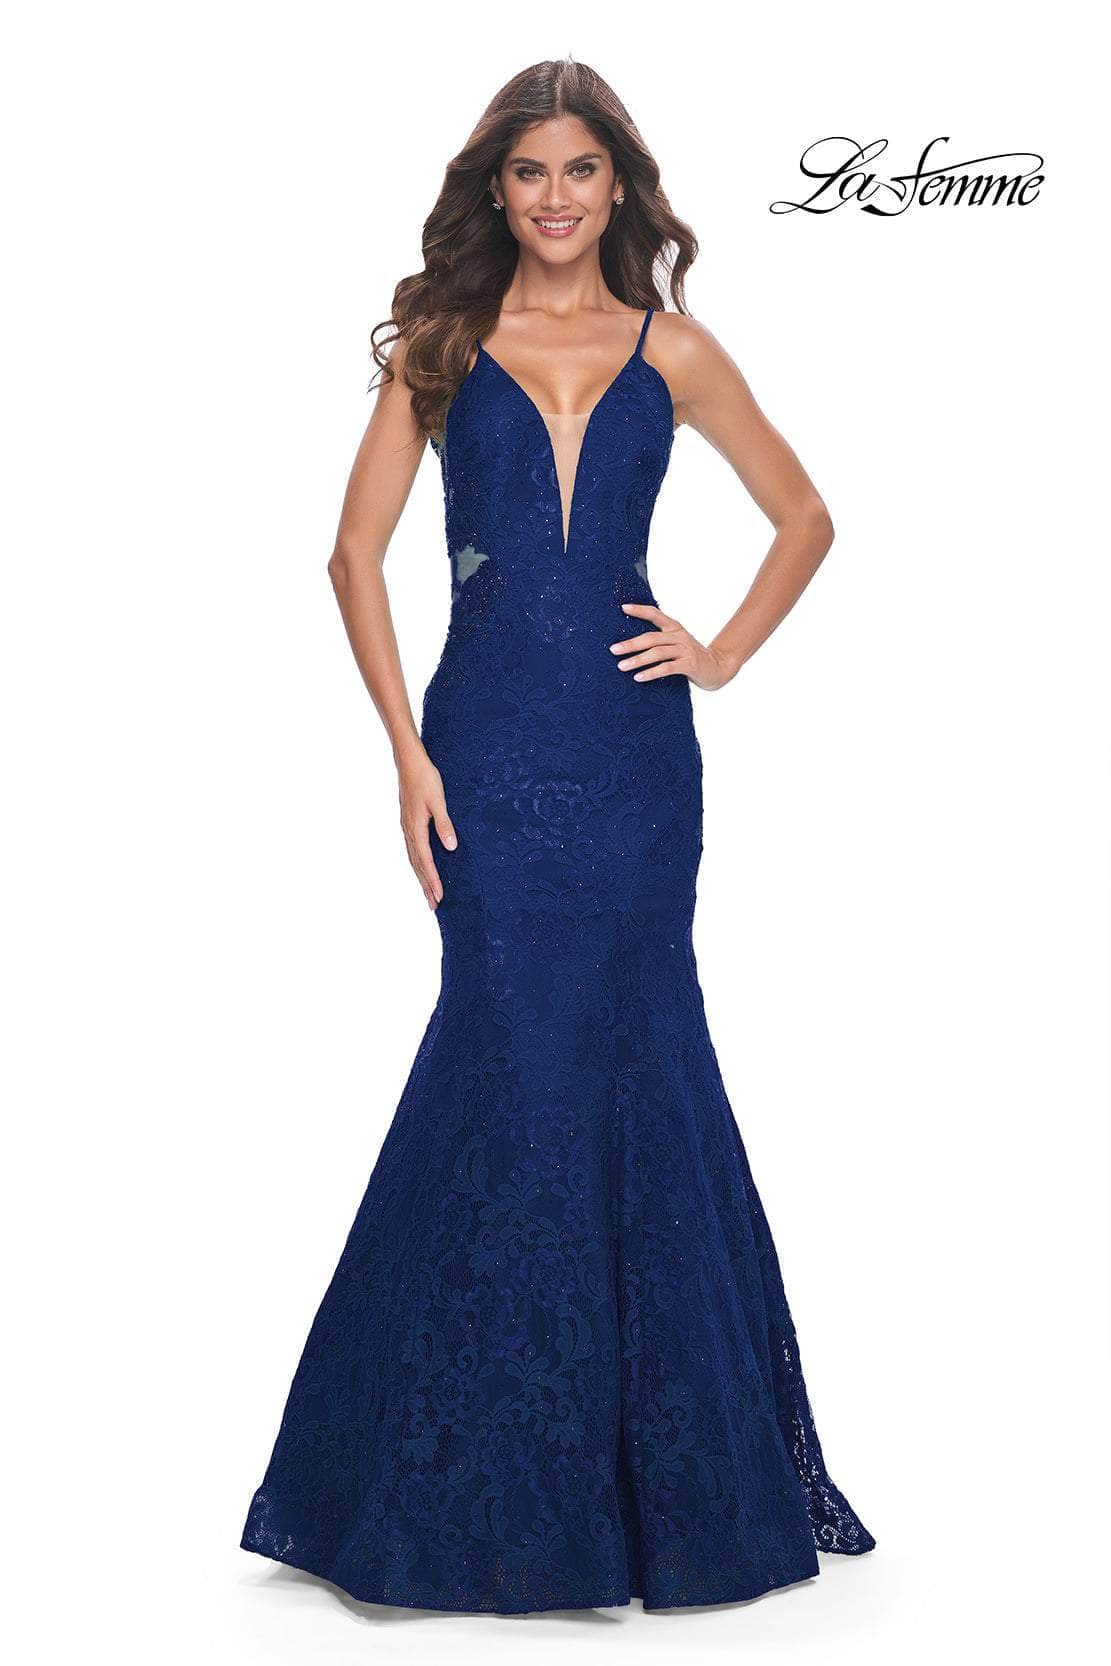 La Femme 32315 - V-Neck Lace Mermaid Prom Gown
